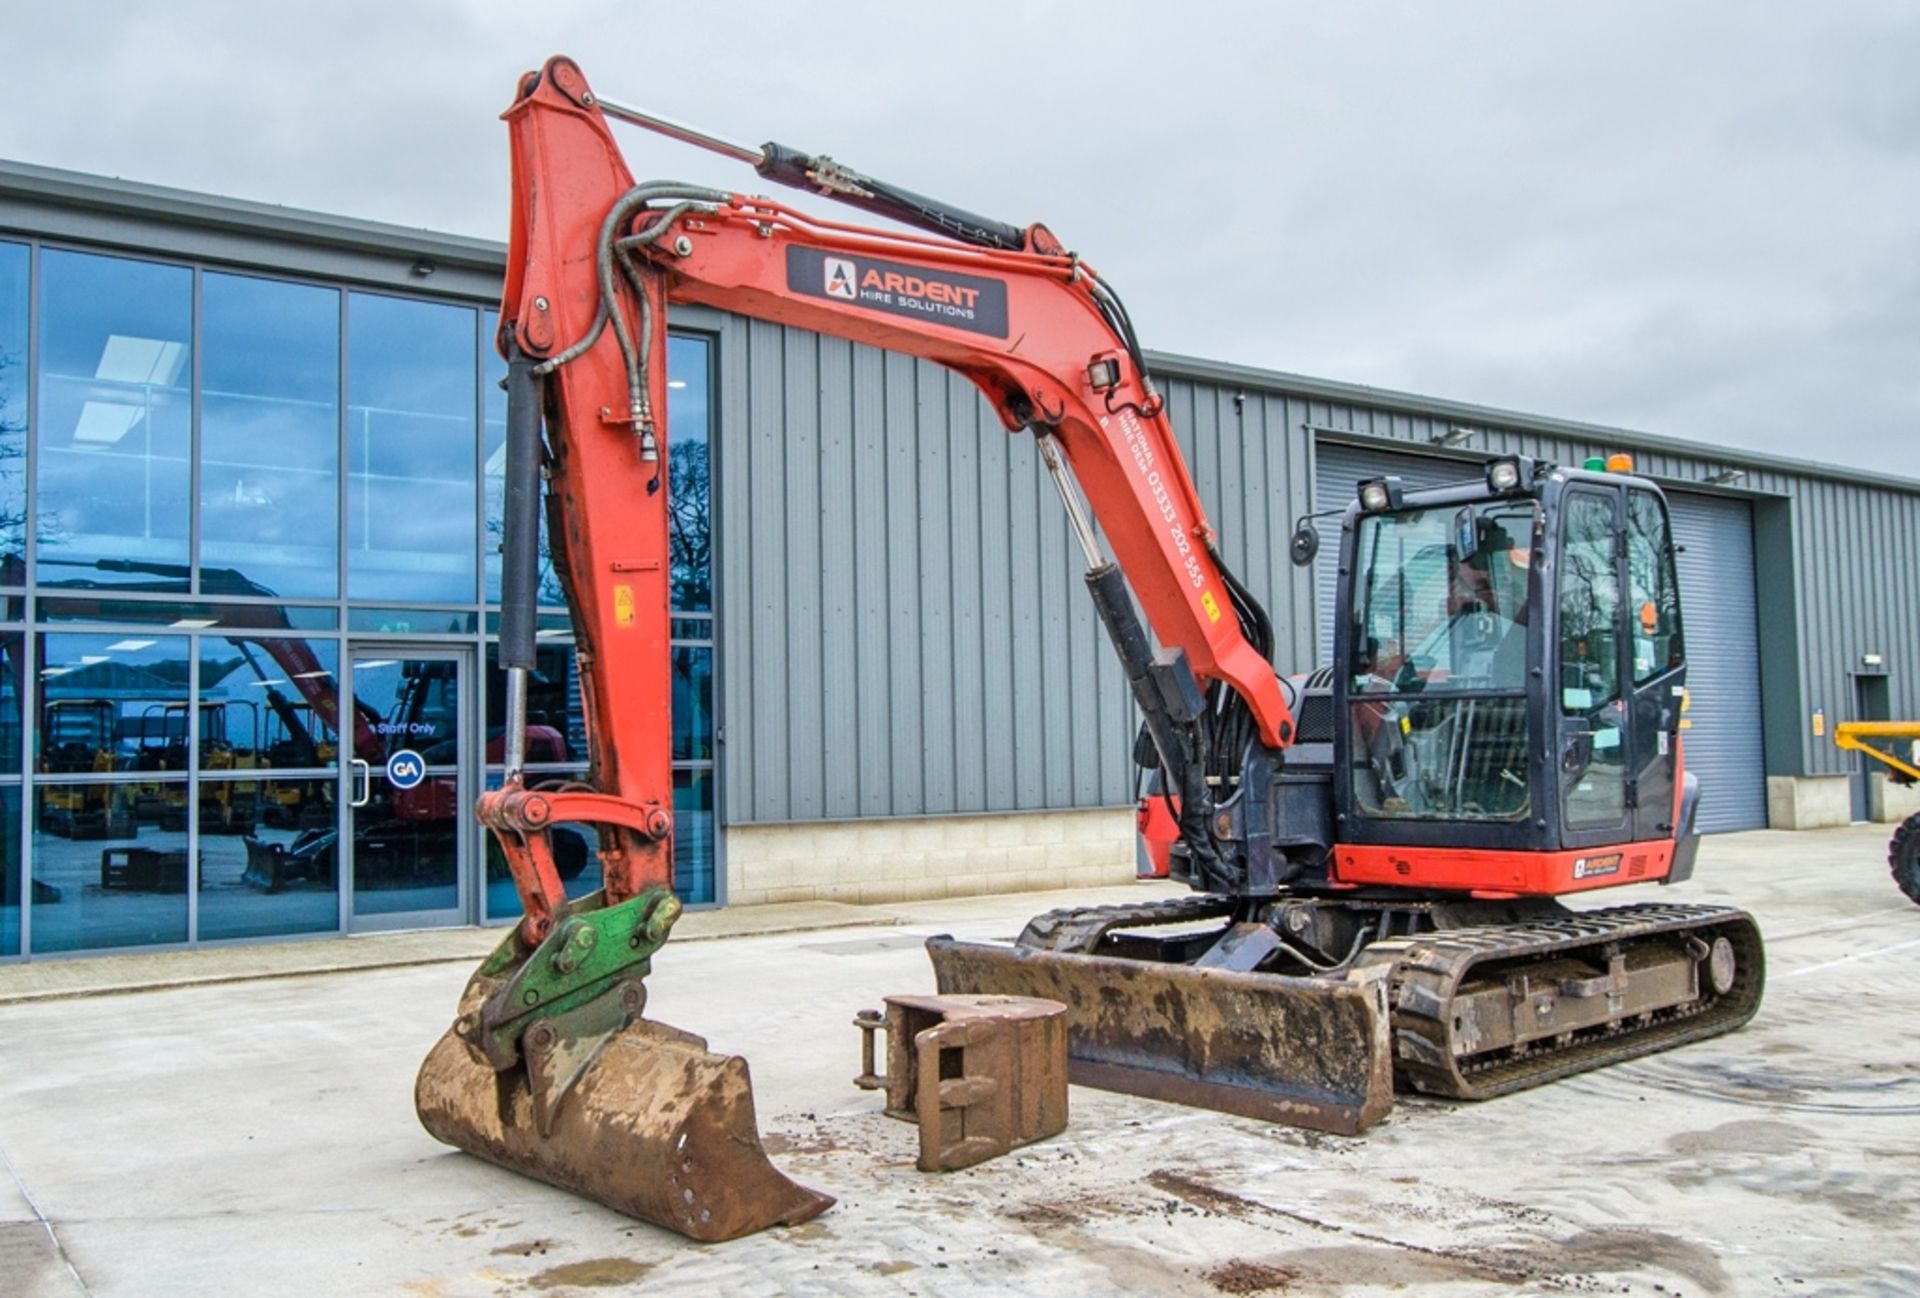 Kubota KX080-4 8 tonne rubber tracked excavator Year: 2018 S/N: 45539 Recorded Hours: 4117 piped,